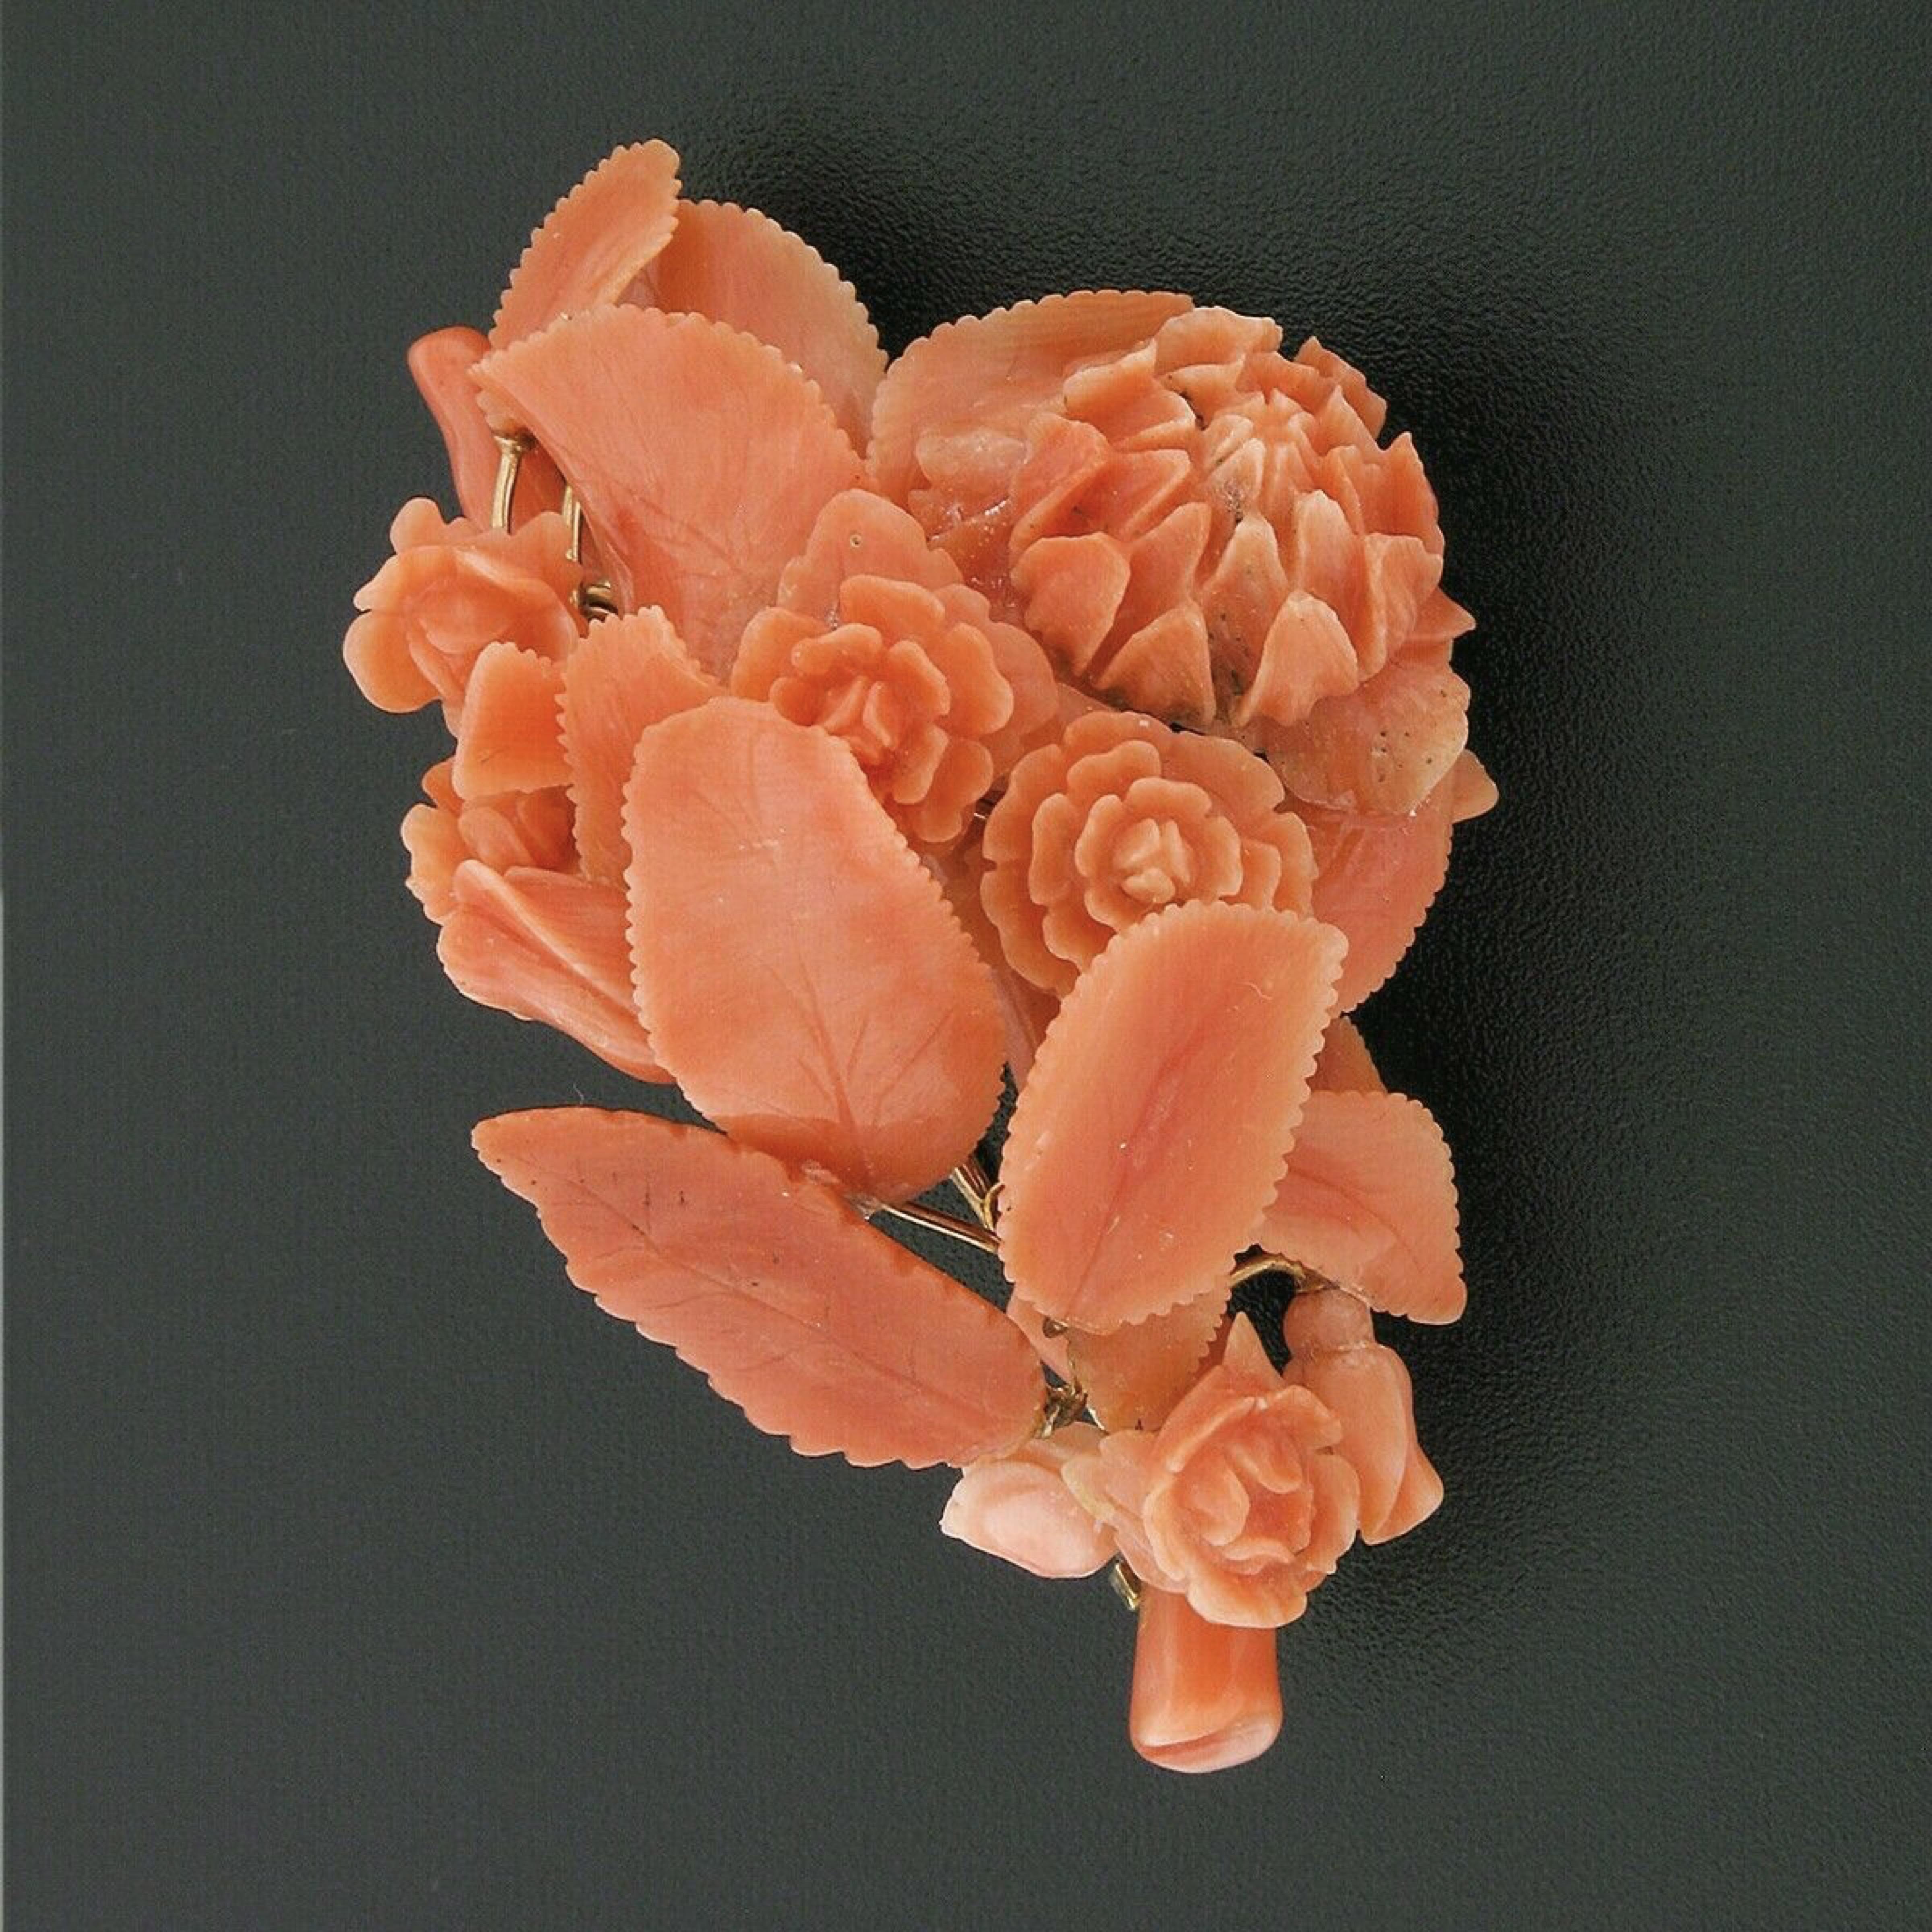 Here we have a magnificent, antique, large pin brooch that was crafted during the Victorian era and features fine coral stones in which have been masterfully carved into a truly amazing floral design. The rose flowers and leaves have been carved